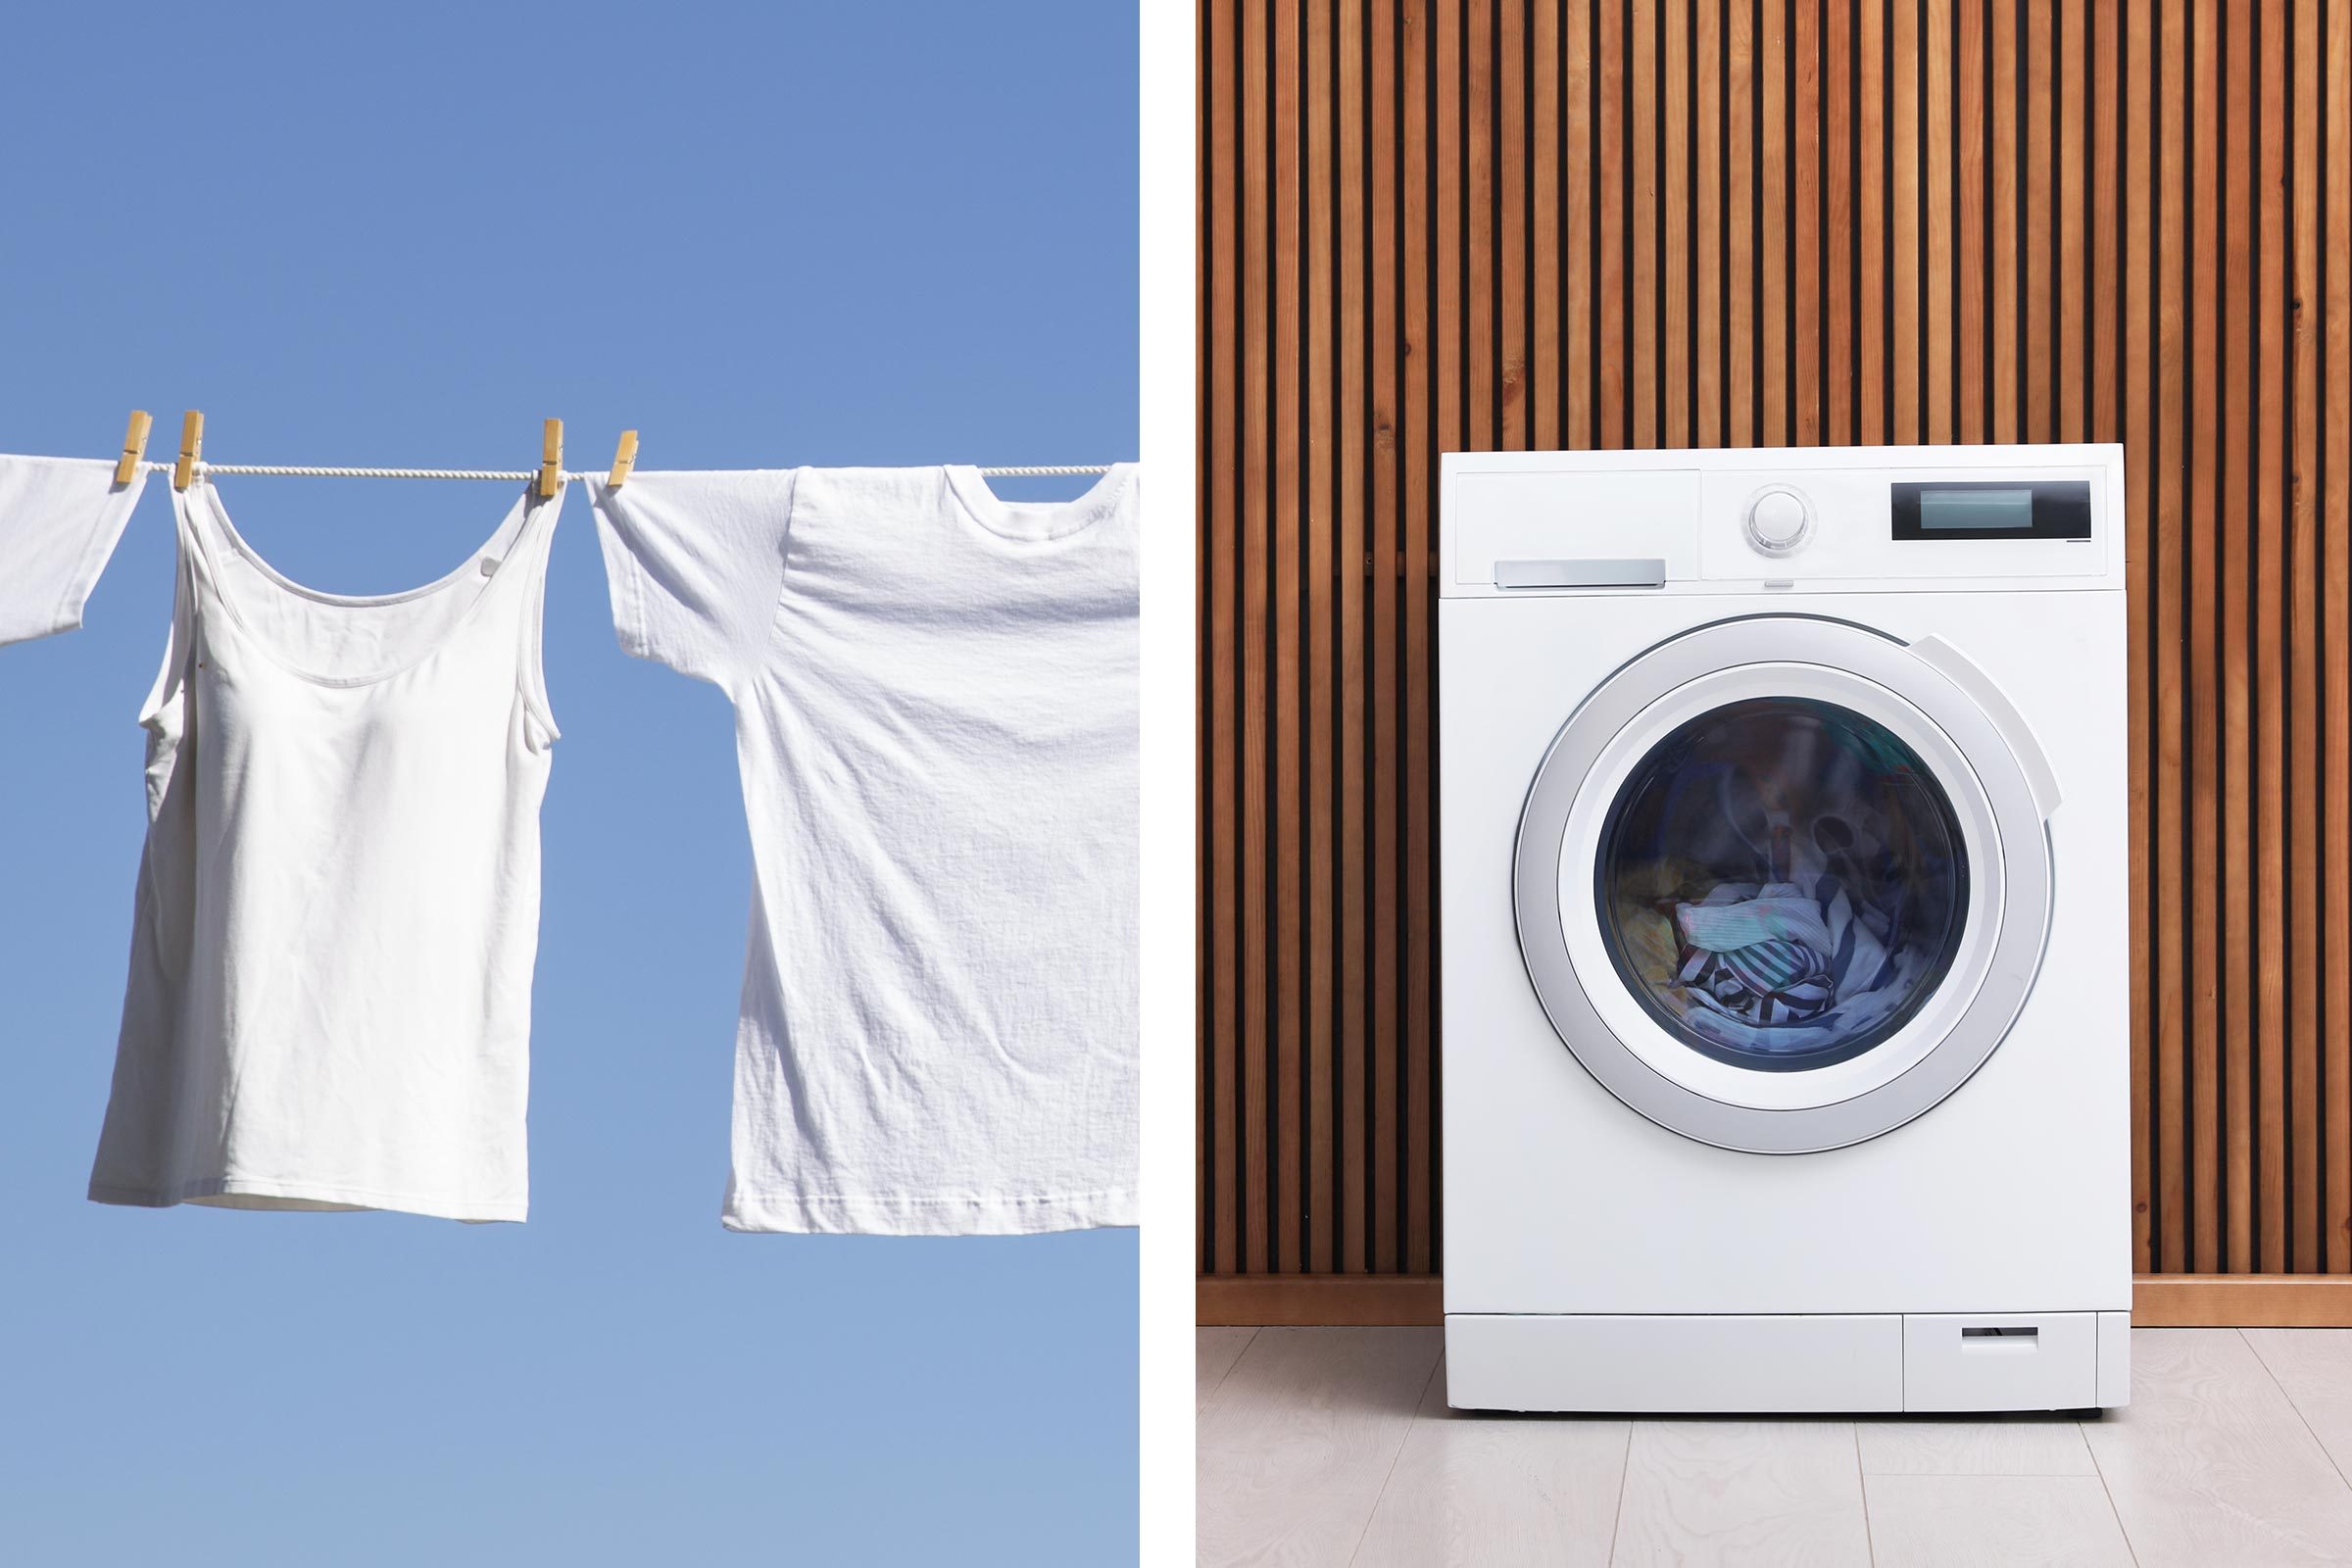 How To Dry Clothes Without a Dryer